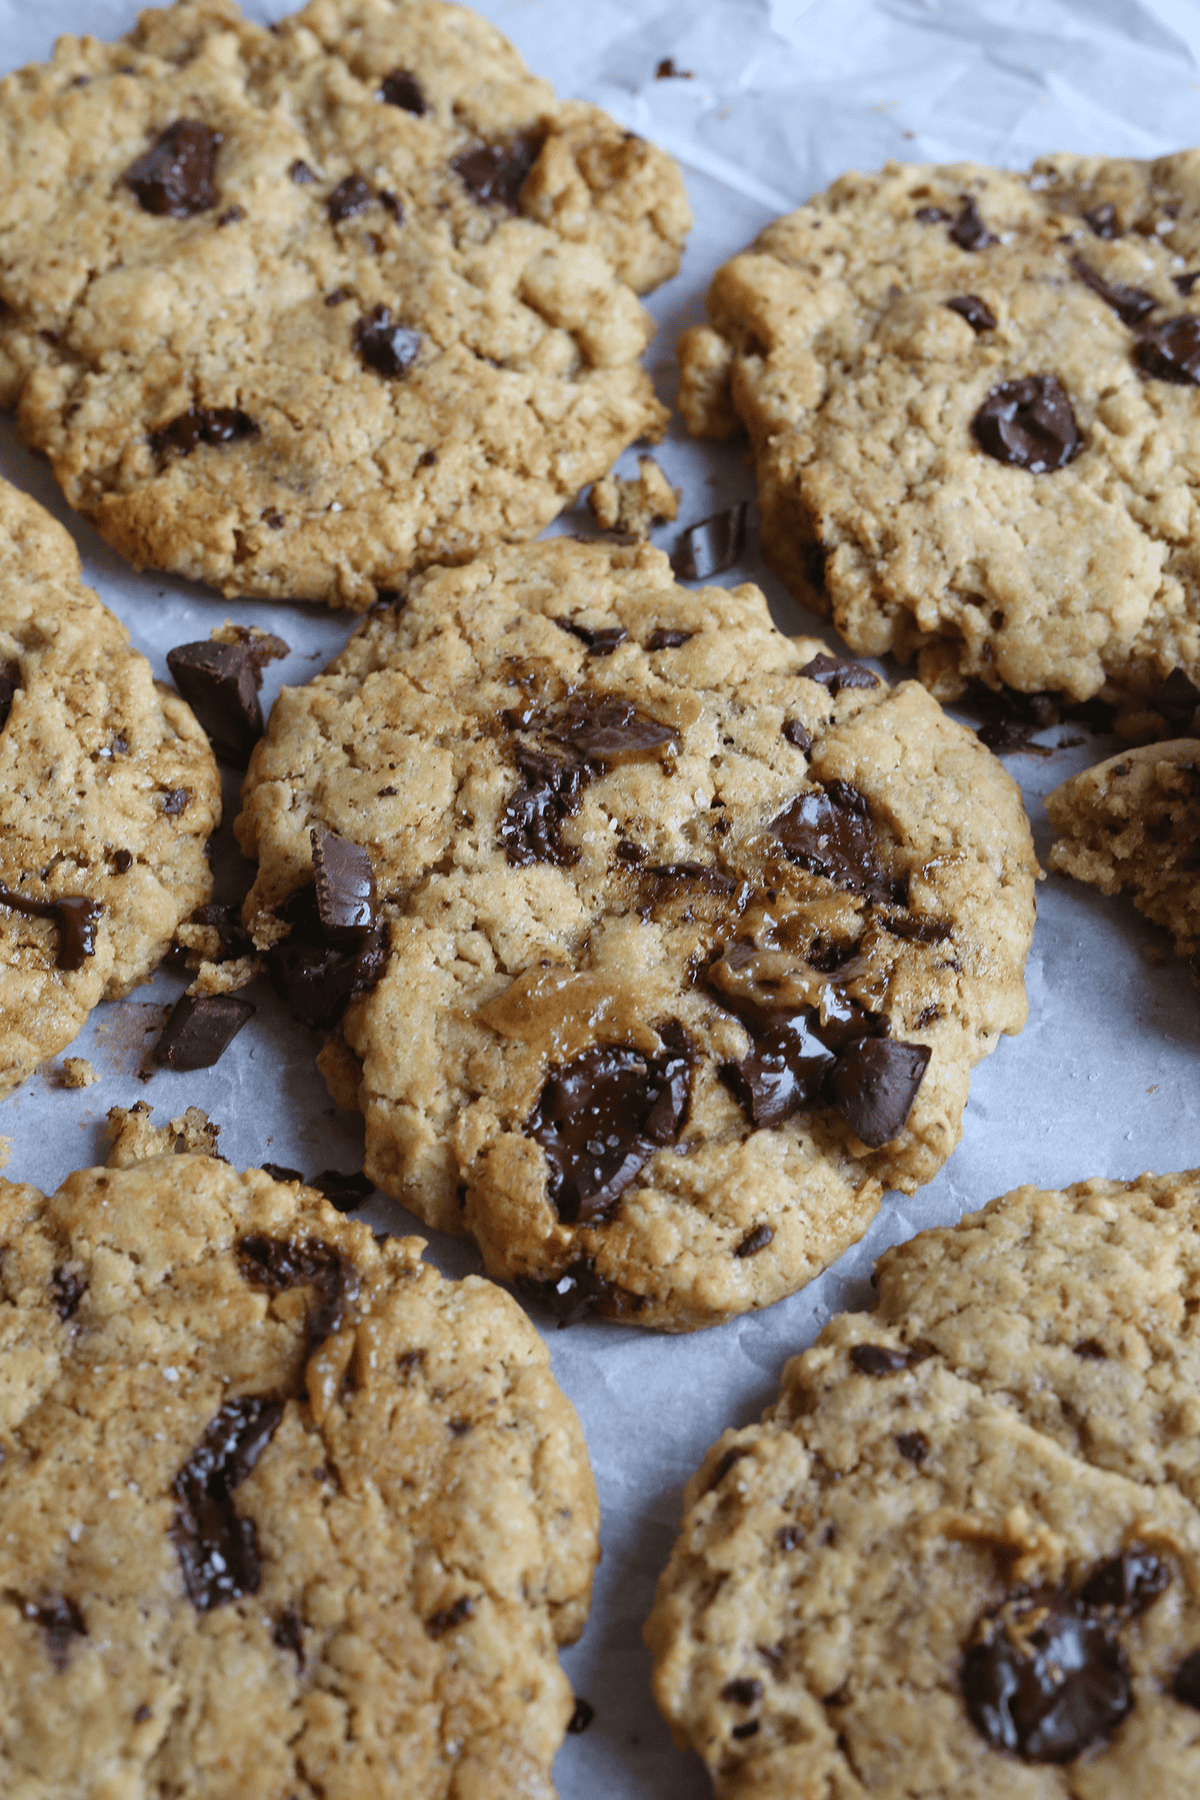 Only 1 bowl required for these vegan Soft Chocolate Chunk Caramel Cookies! They are moist and chewy, sweet and indulgent.